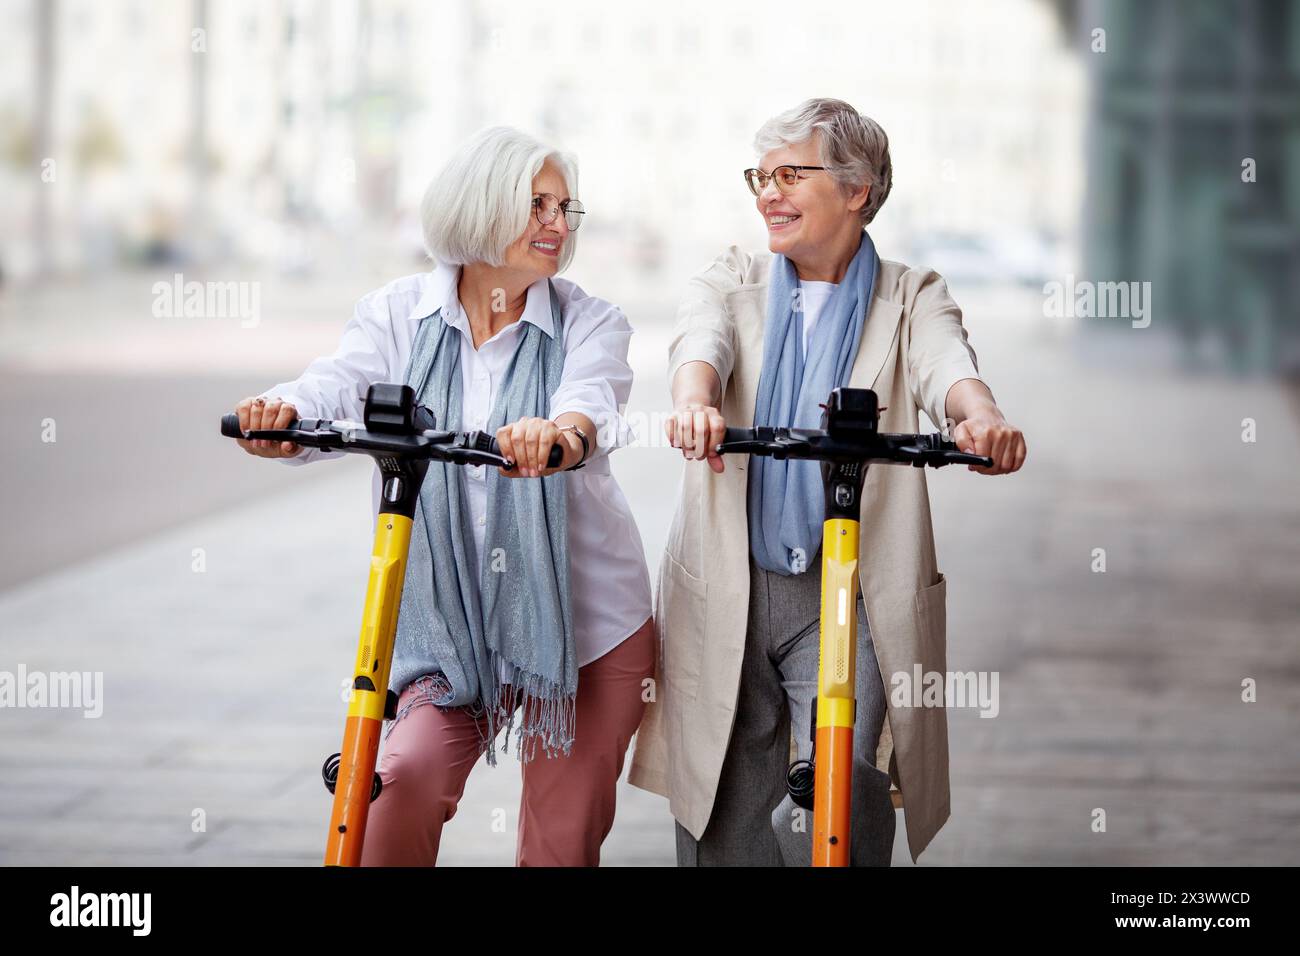 Mature joyful gray haired women friends ride electric scooters in the city, happy smiling, enjoying a fun time together. Stock Photo